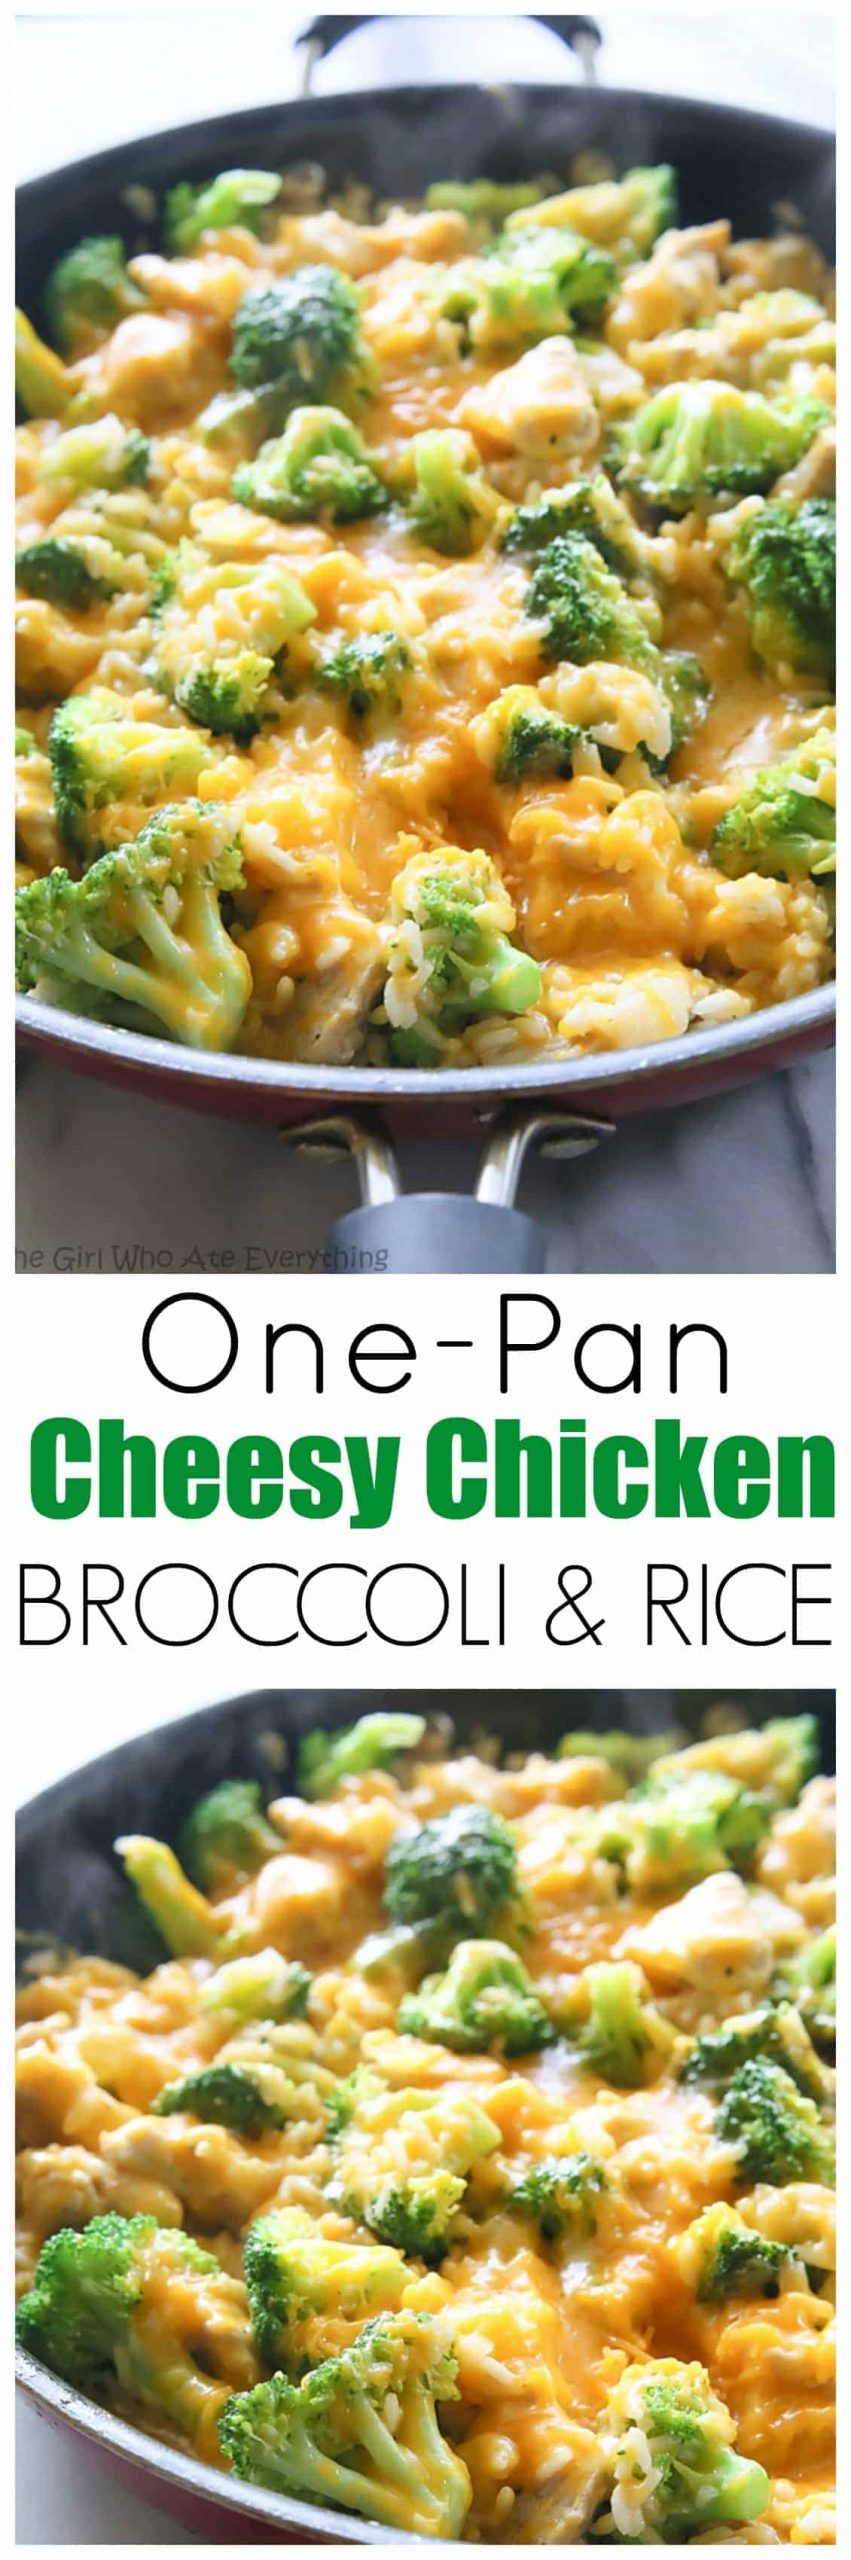 One-Pan Cheesy Chicken Broccoli and Rice Skillet - my go-to for an easy dinner. the-girl-who-ate-everything.com